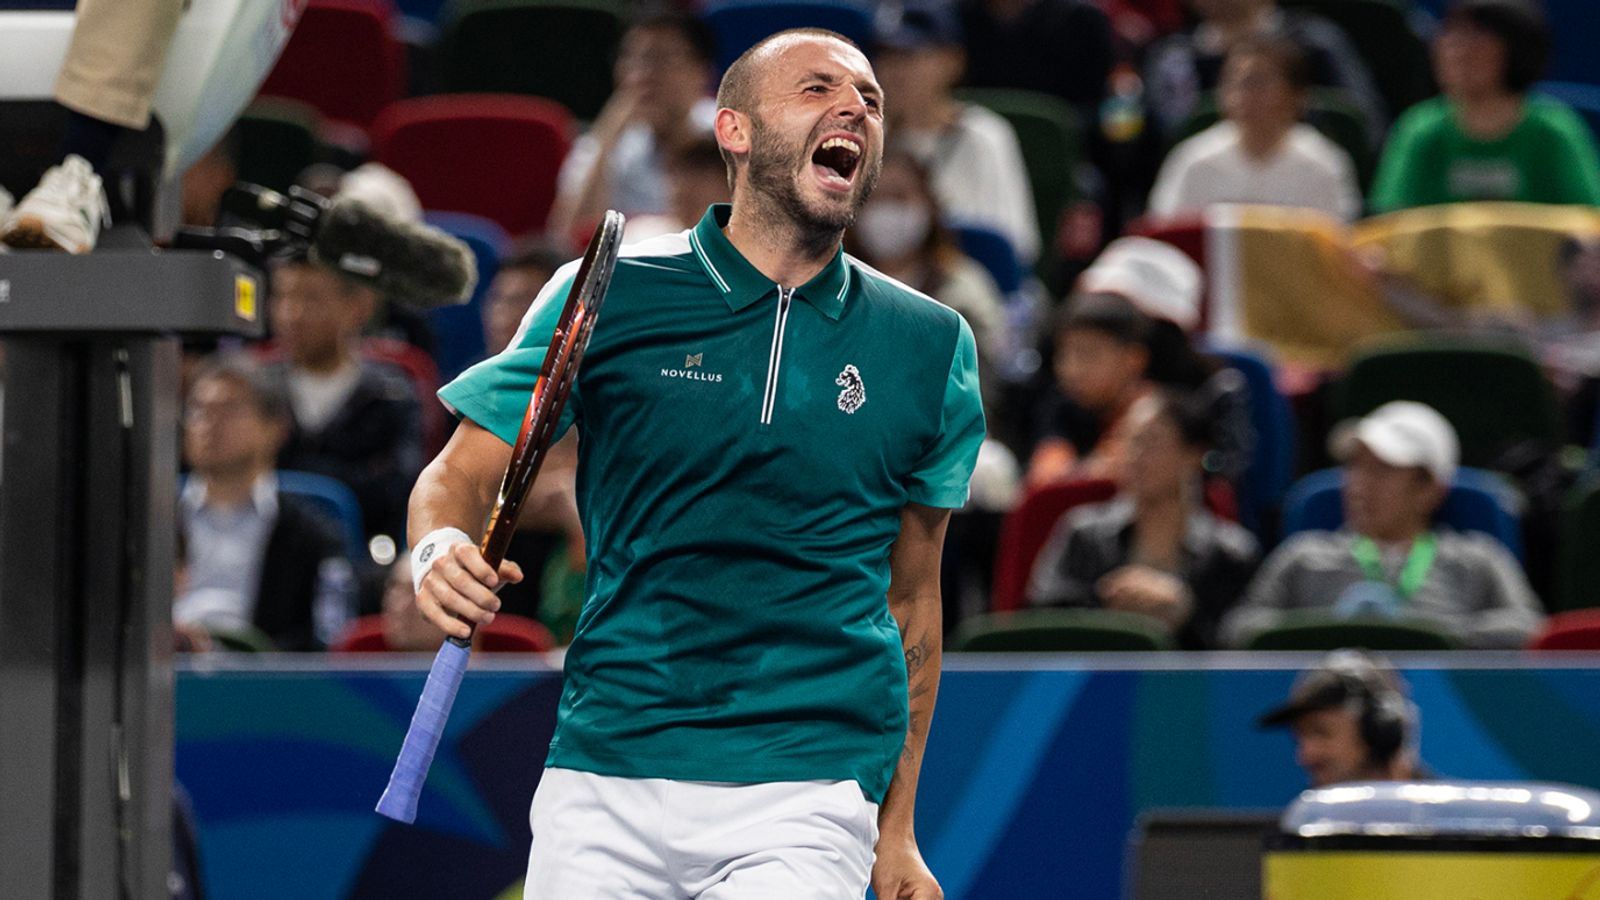 Dan Evans of Great Britain reacts during his match against Carlos Alcaraz of Spain in their men's singles round of 32 match on Day 8 of the 2023 Shanghai Rolex Masters at Qi Zhong Tennis Centre on October 09, 2023 in Shanghai, China. (Photo by Hugo Hu/Getty Images)